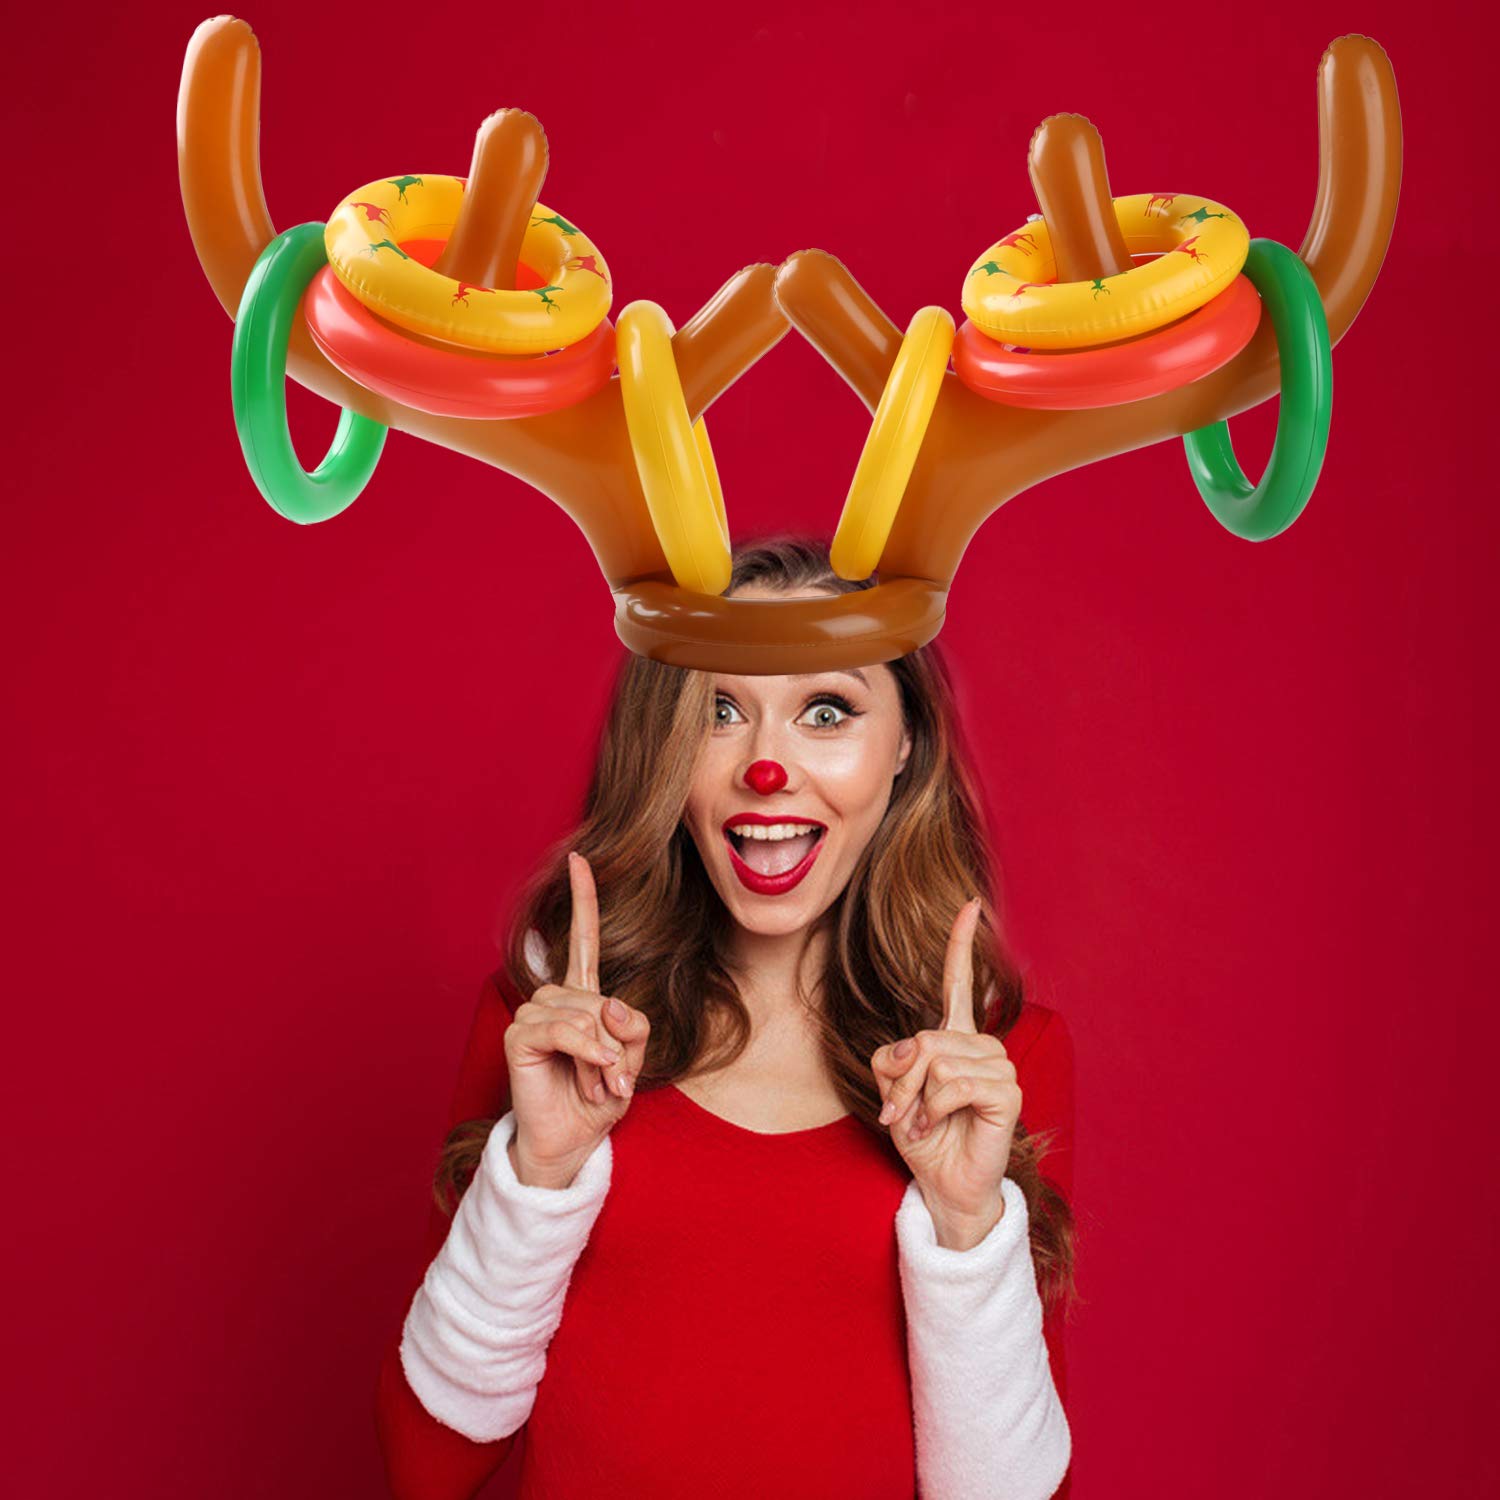 (🎄Christmas Hot Sale🔥🔥)Christmas Inflatable Reindeer Antler Toss Game(BUY 5 GET 3 FREE & FREE SHIPPING)